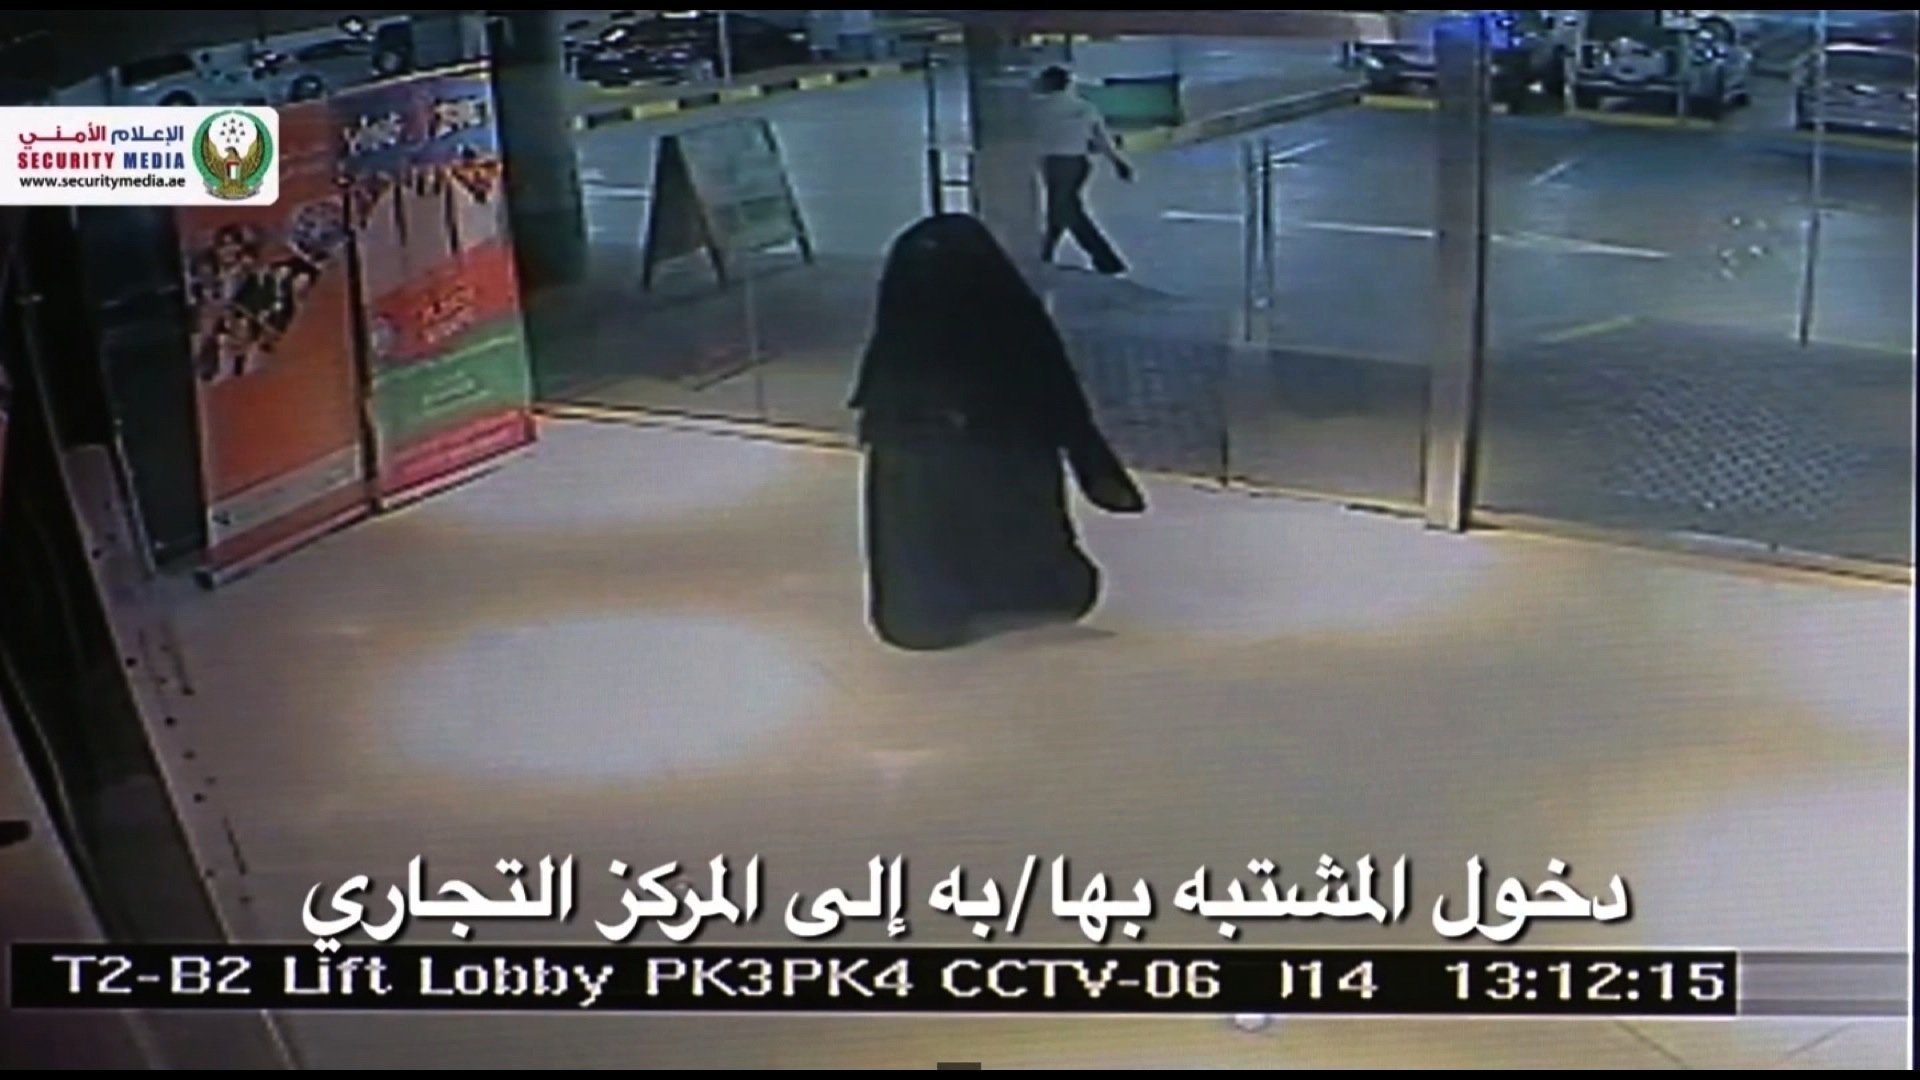 An American woman was stabbed in the women's restroom at a high-end mall in Abu Dhabi, United Arab Emirates on Monday, Dec. 1, 2014. This image shows the suspect, dressed in a burqua, in the mall. (CNN)